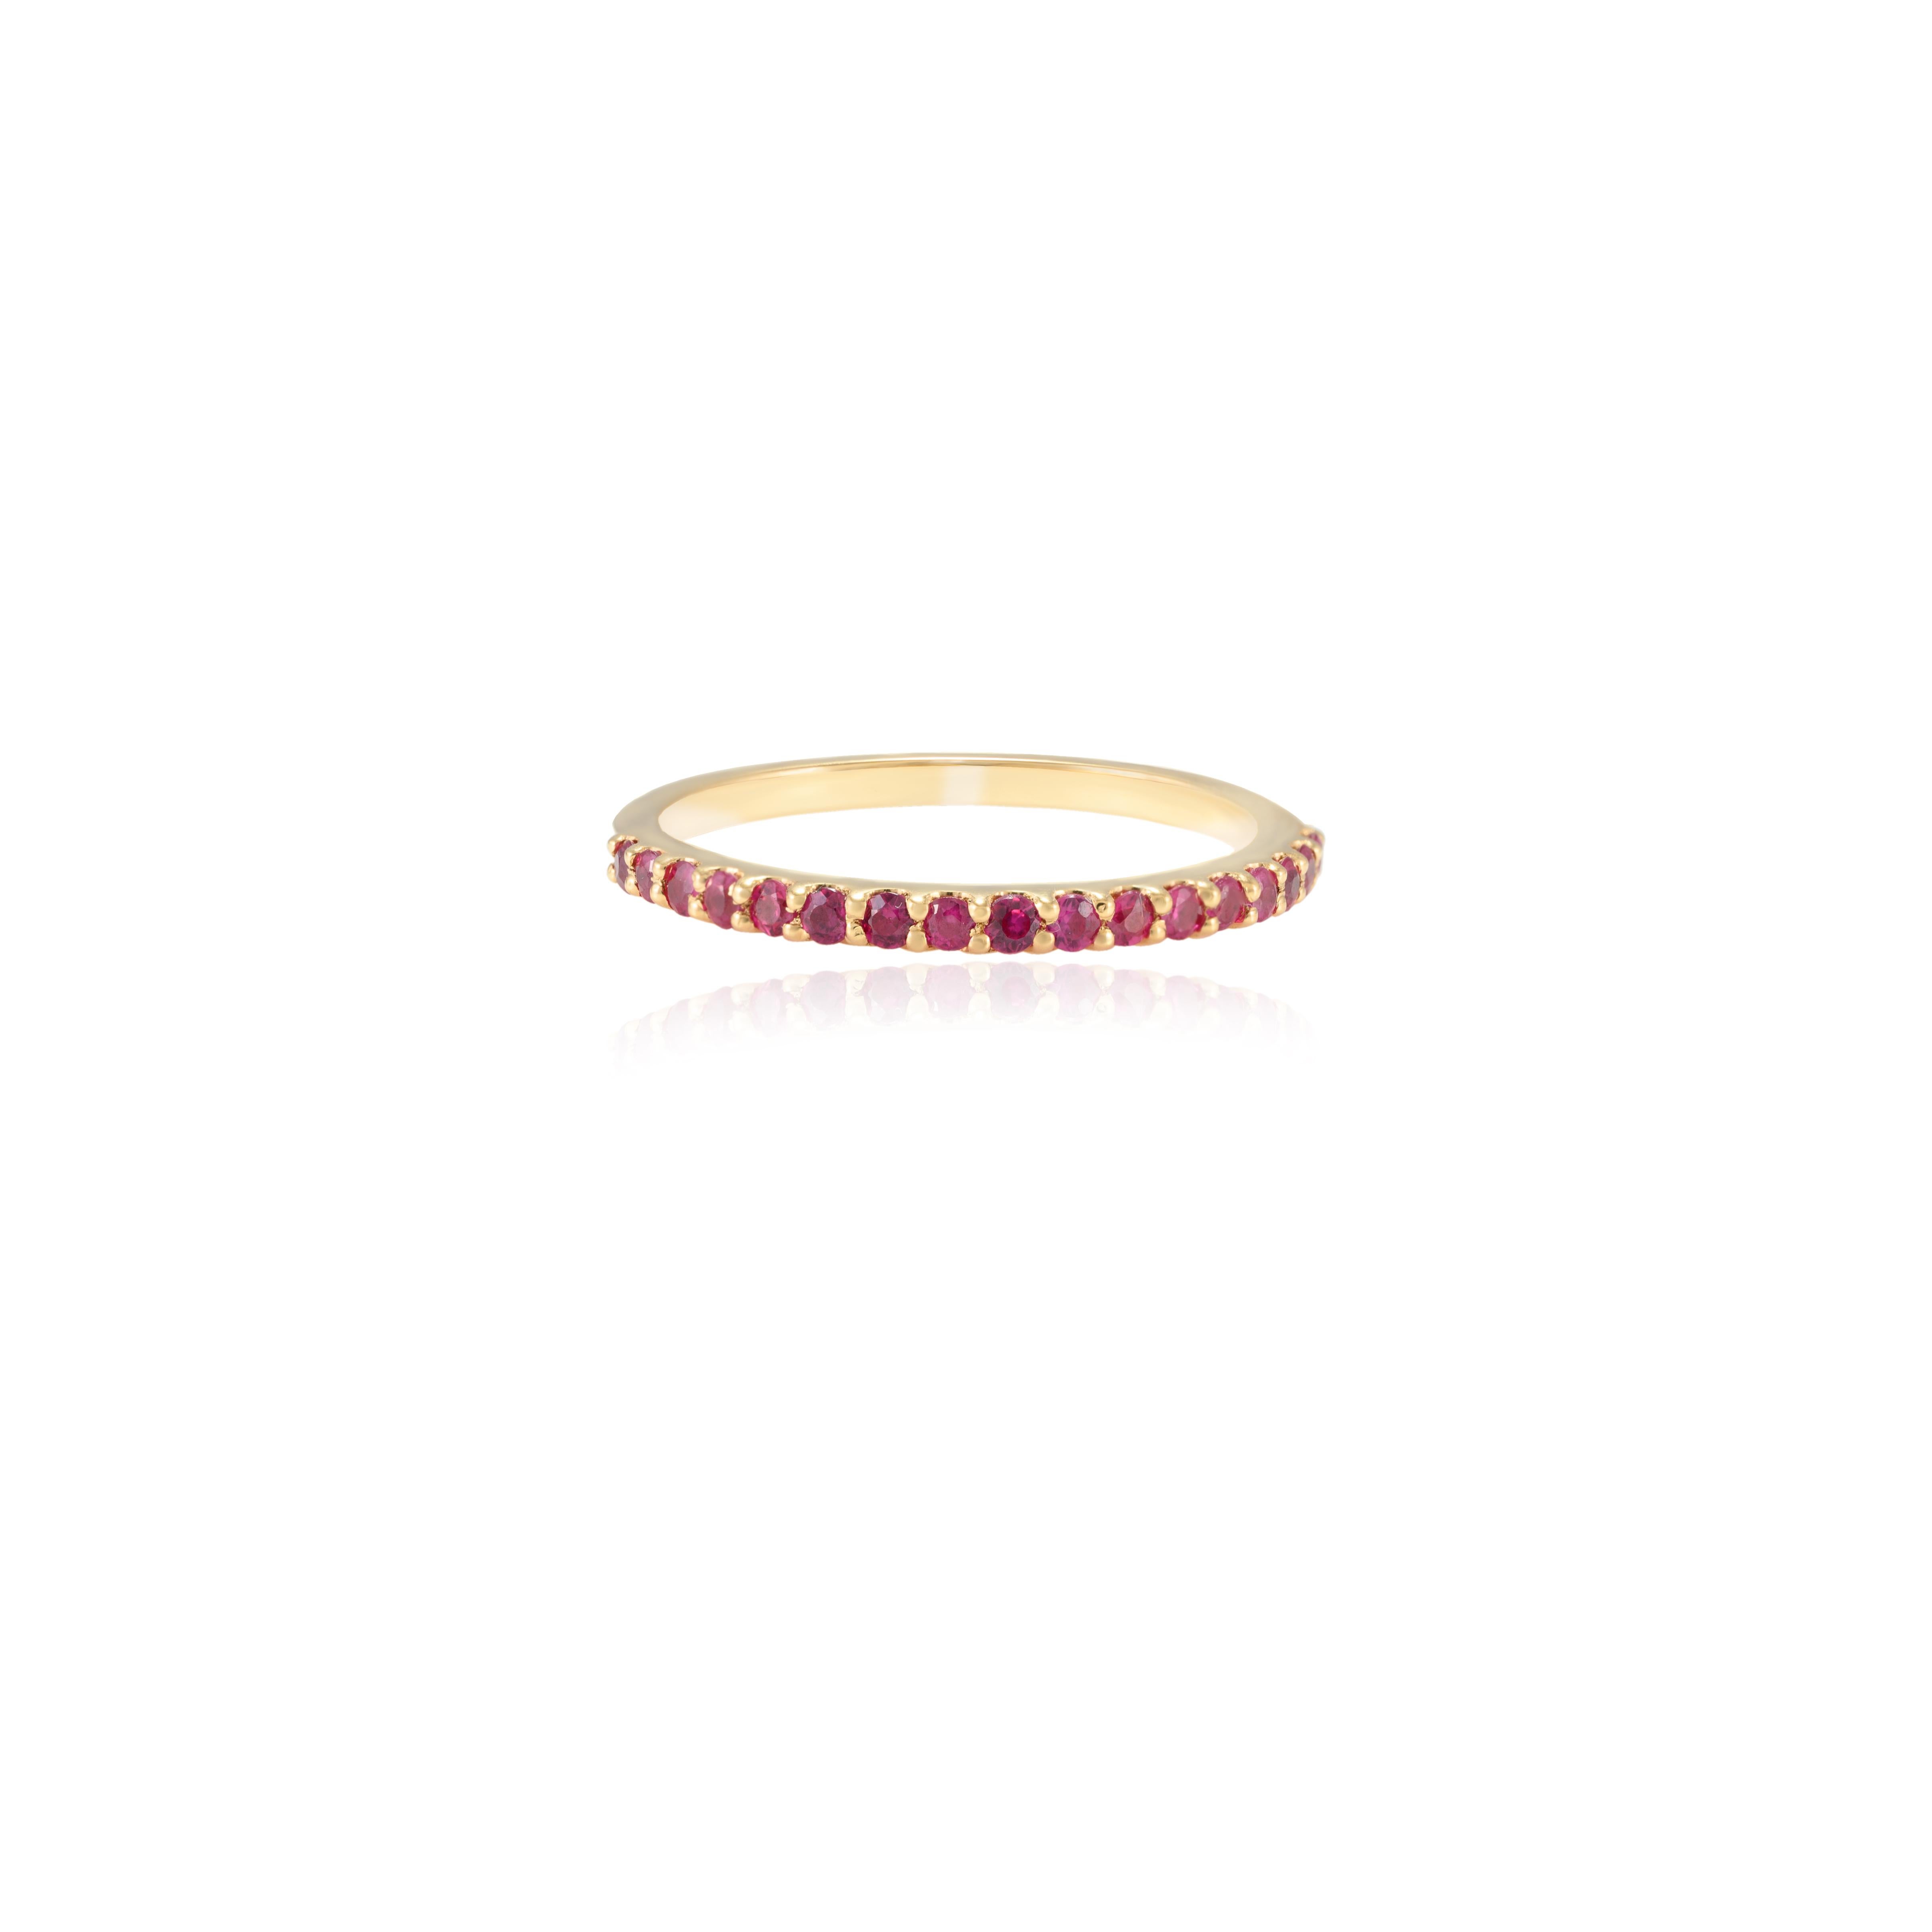 For Sale:  18k Solid Yellow Gold Stackable Round Cut Pave Ruby Gemstone Half Eternity Band 5